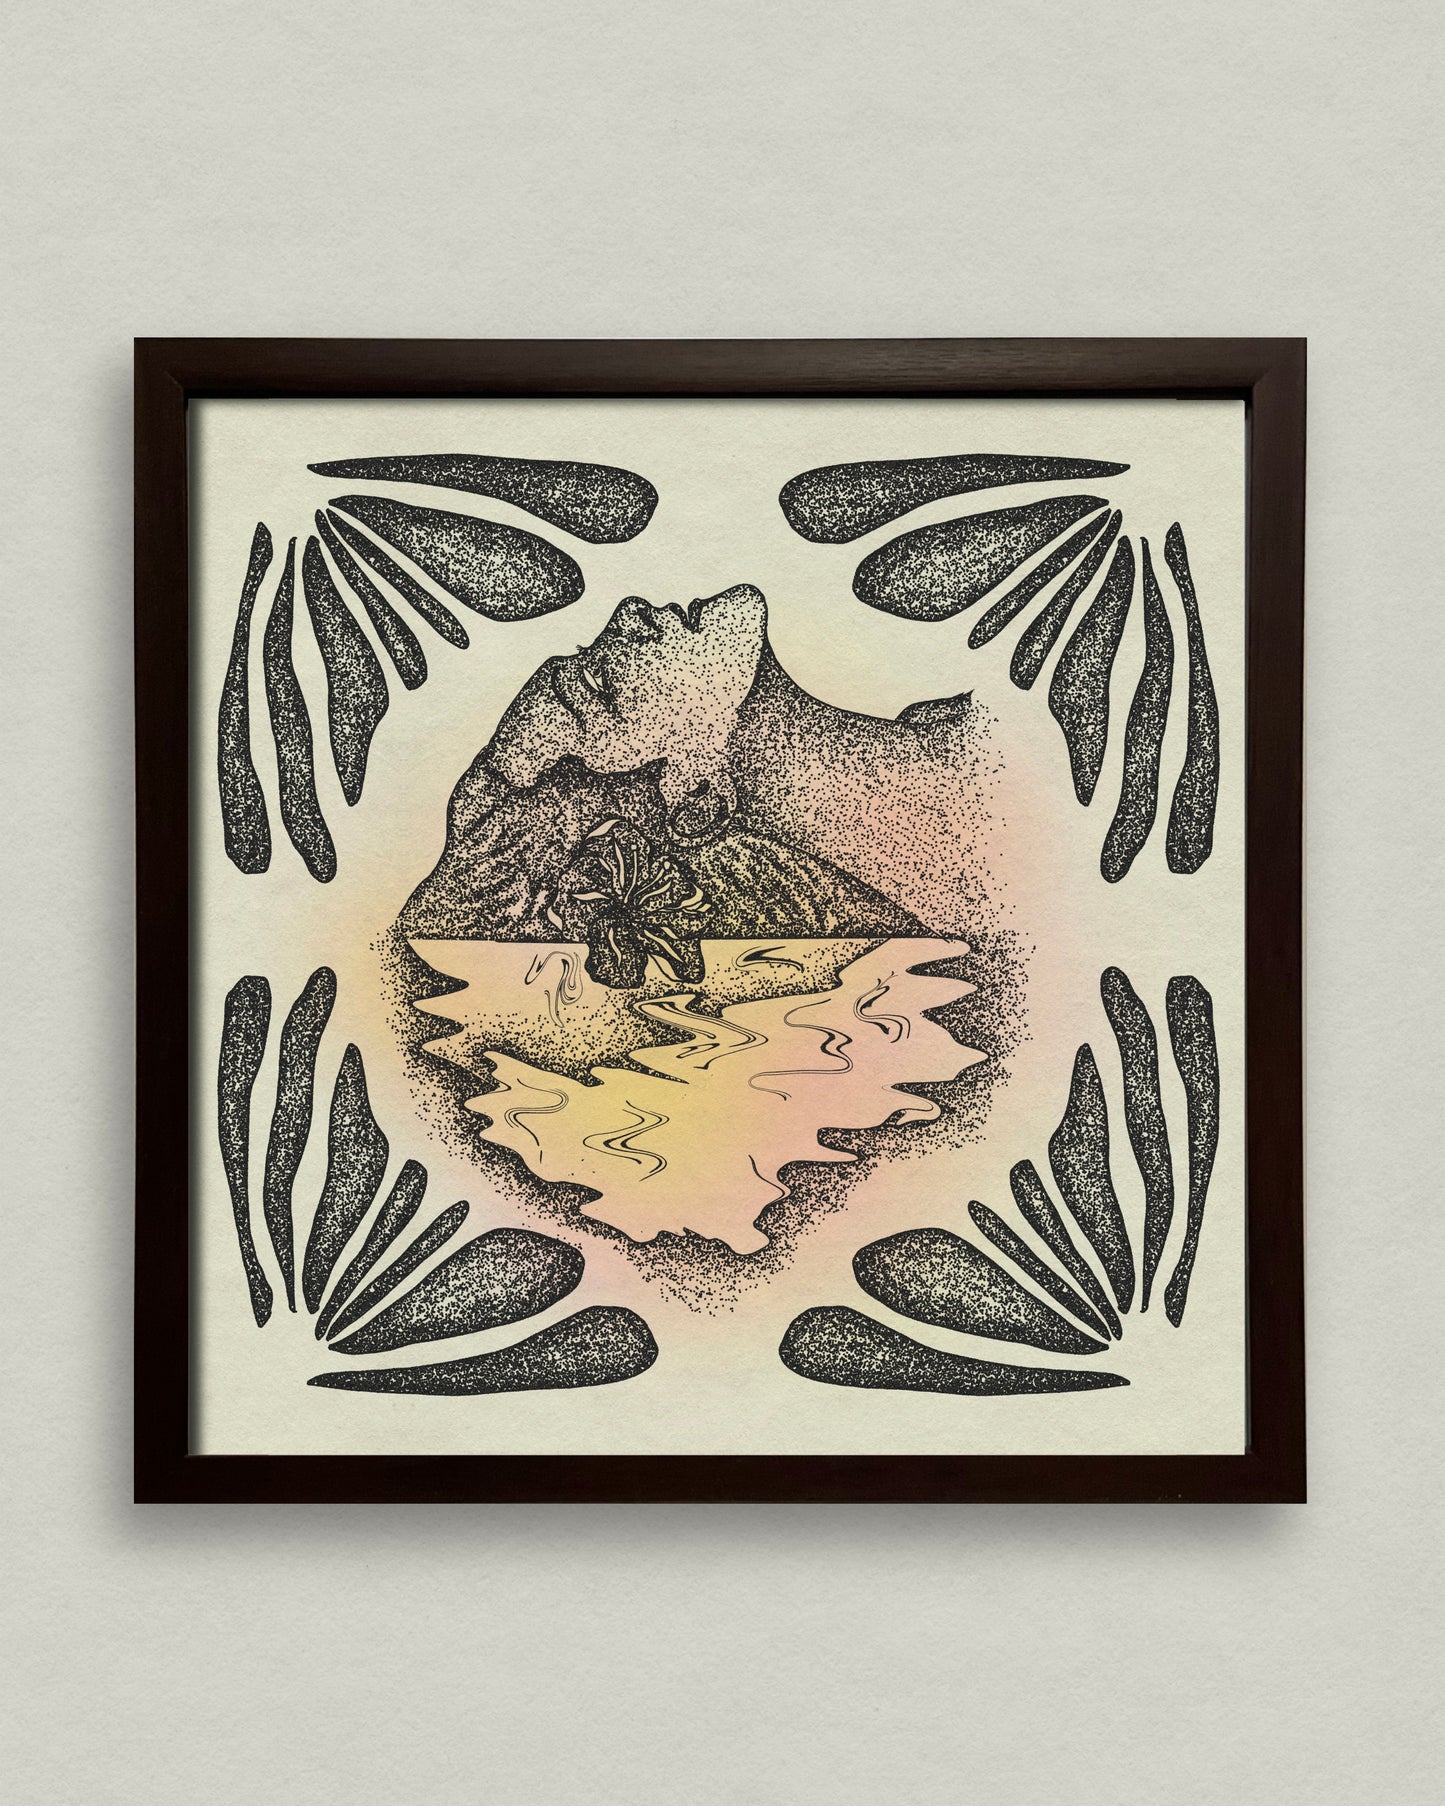 Relax and Reflect 12x12 Framed Print